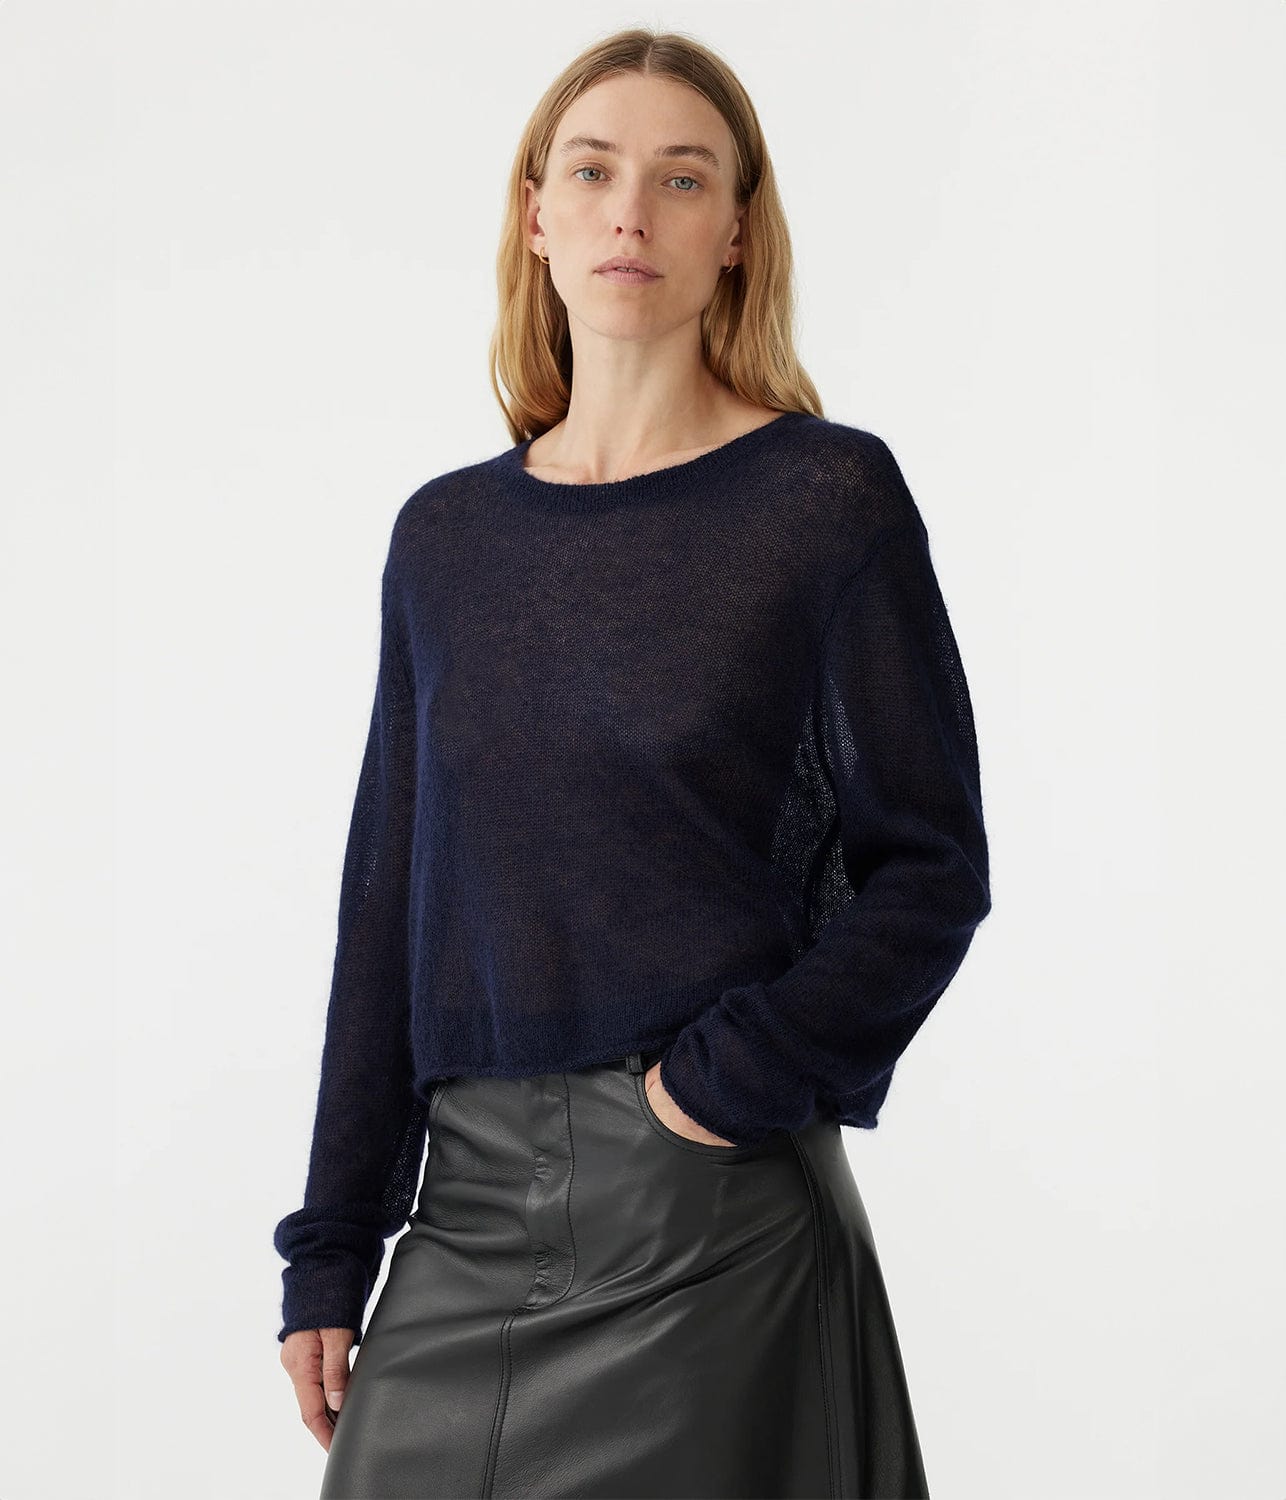 SUPERFINE MOHAIR KNIT- INK | BASSIKE | BASSIKE SUPERFINE MOHAIR KNIT- INK